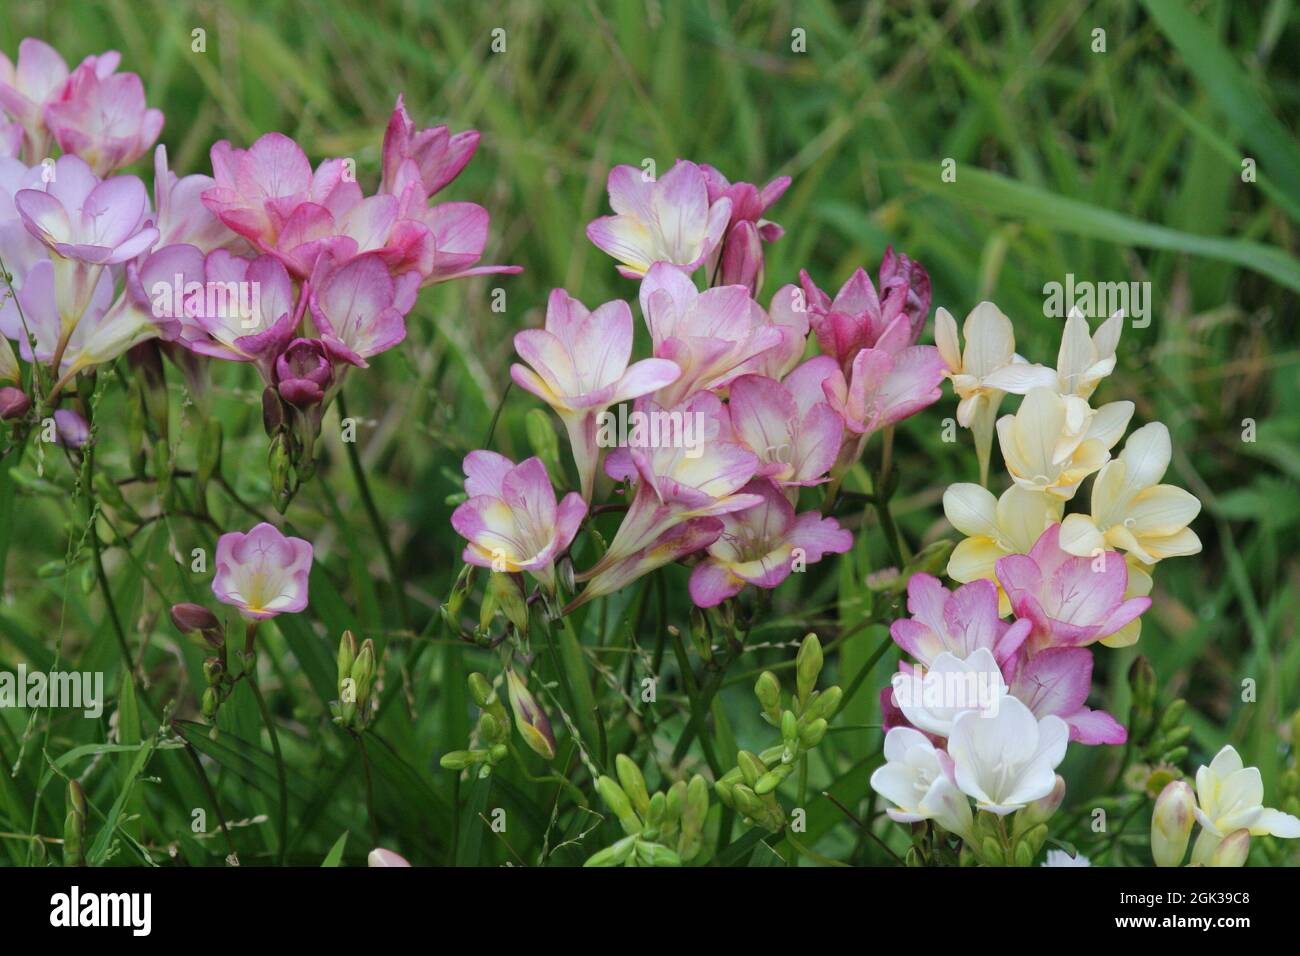 Pink, White and Yellow Ixia bulb Flowers in a field of grass. Stock Photo